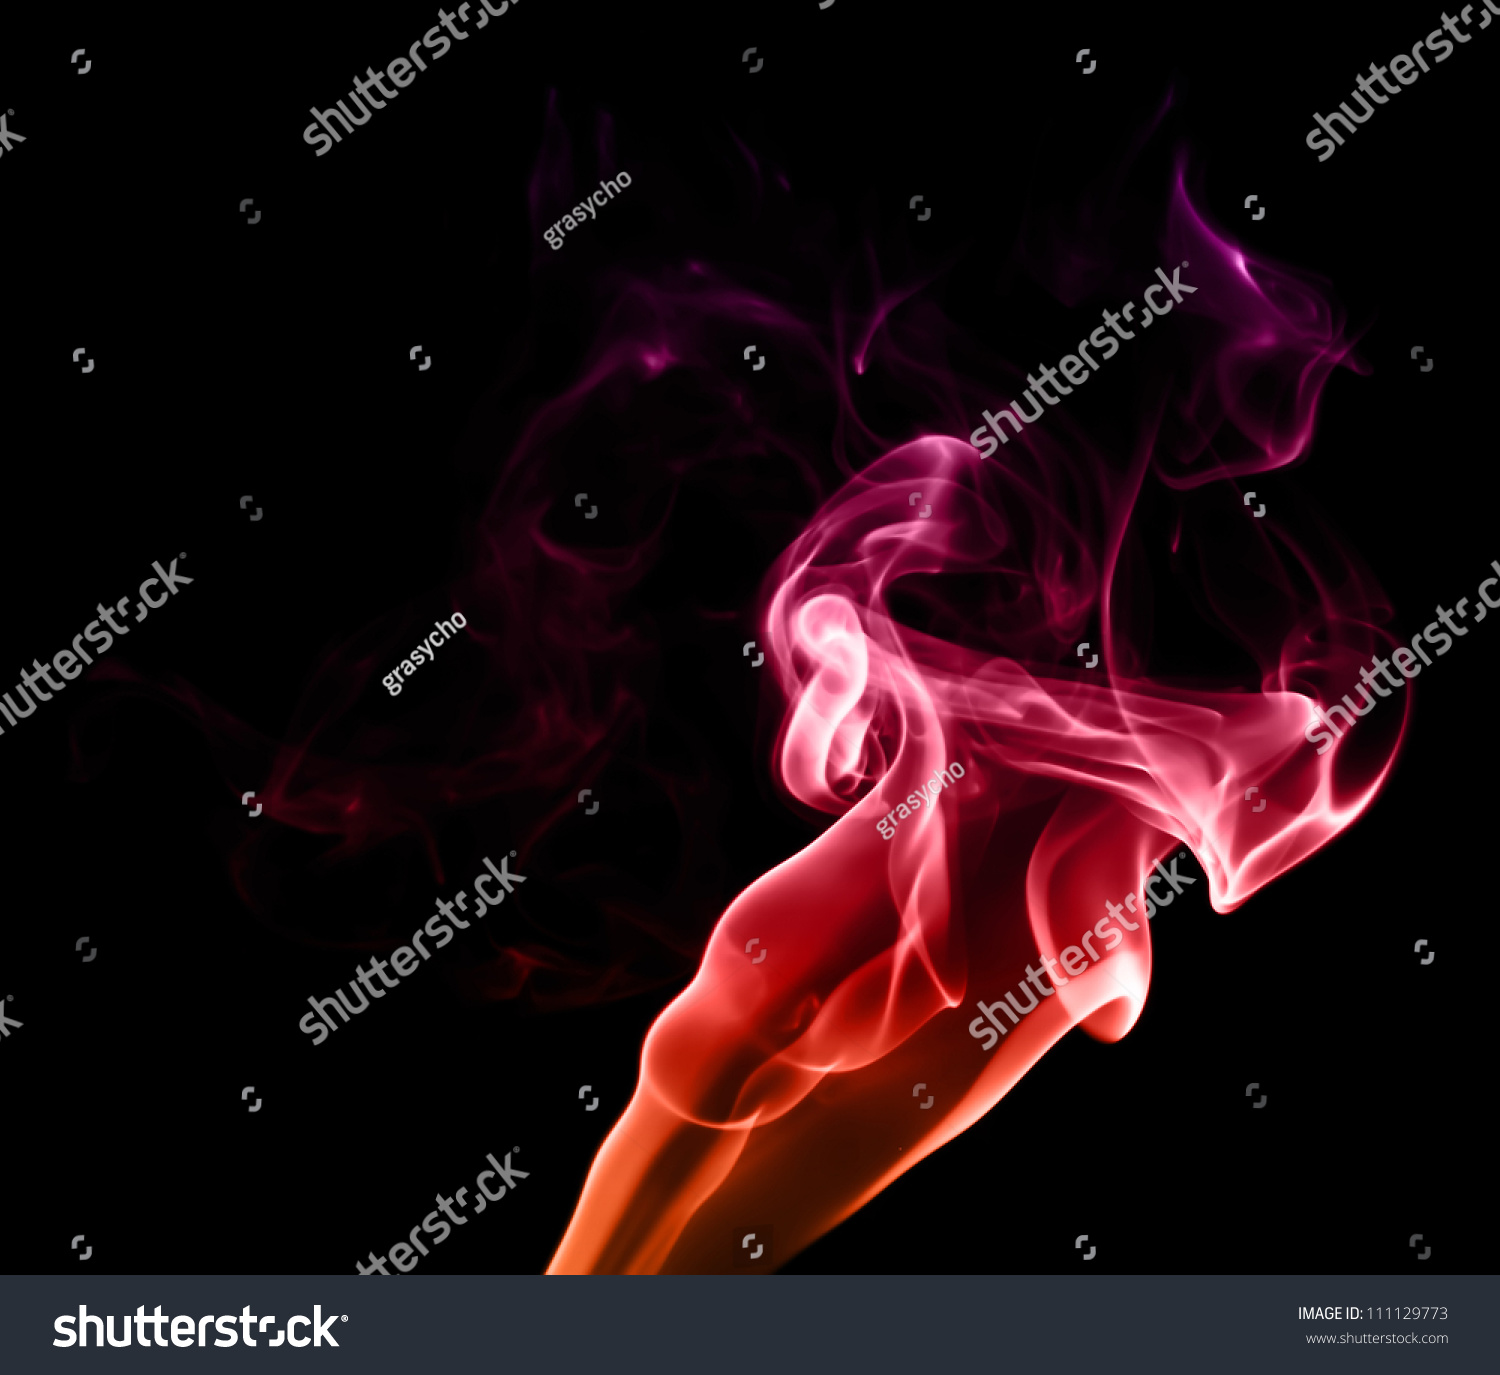 Red Purple Fire Like Abstract Smoke Stock Photo (Royalty Free ...